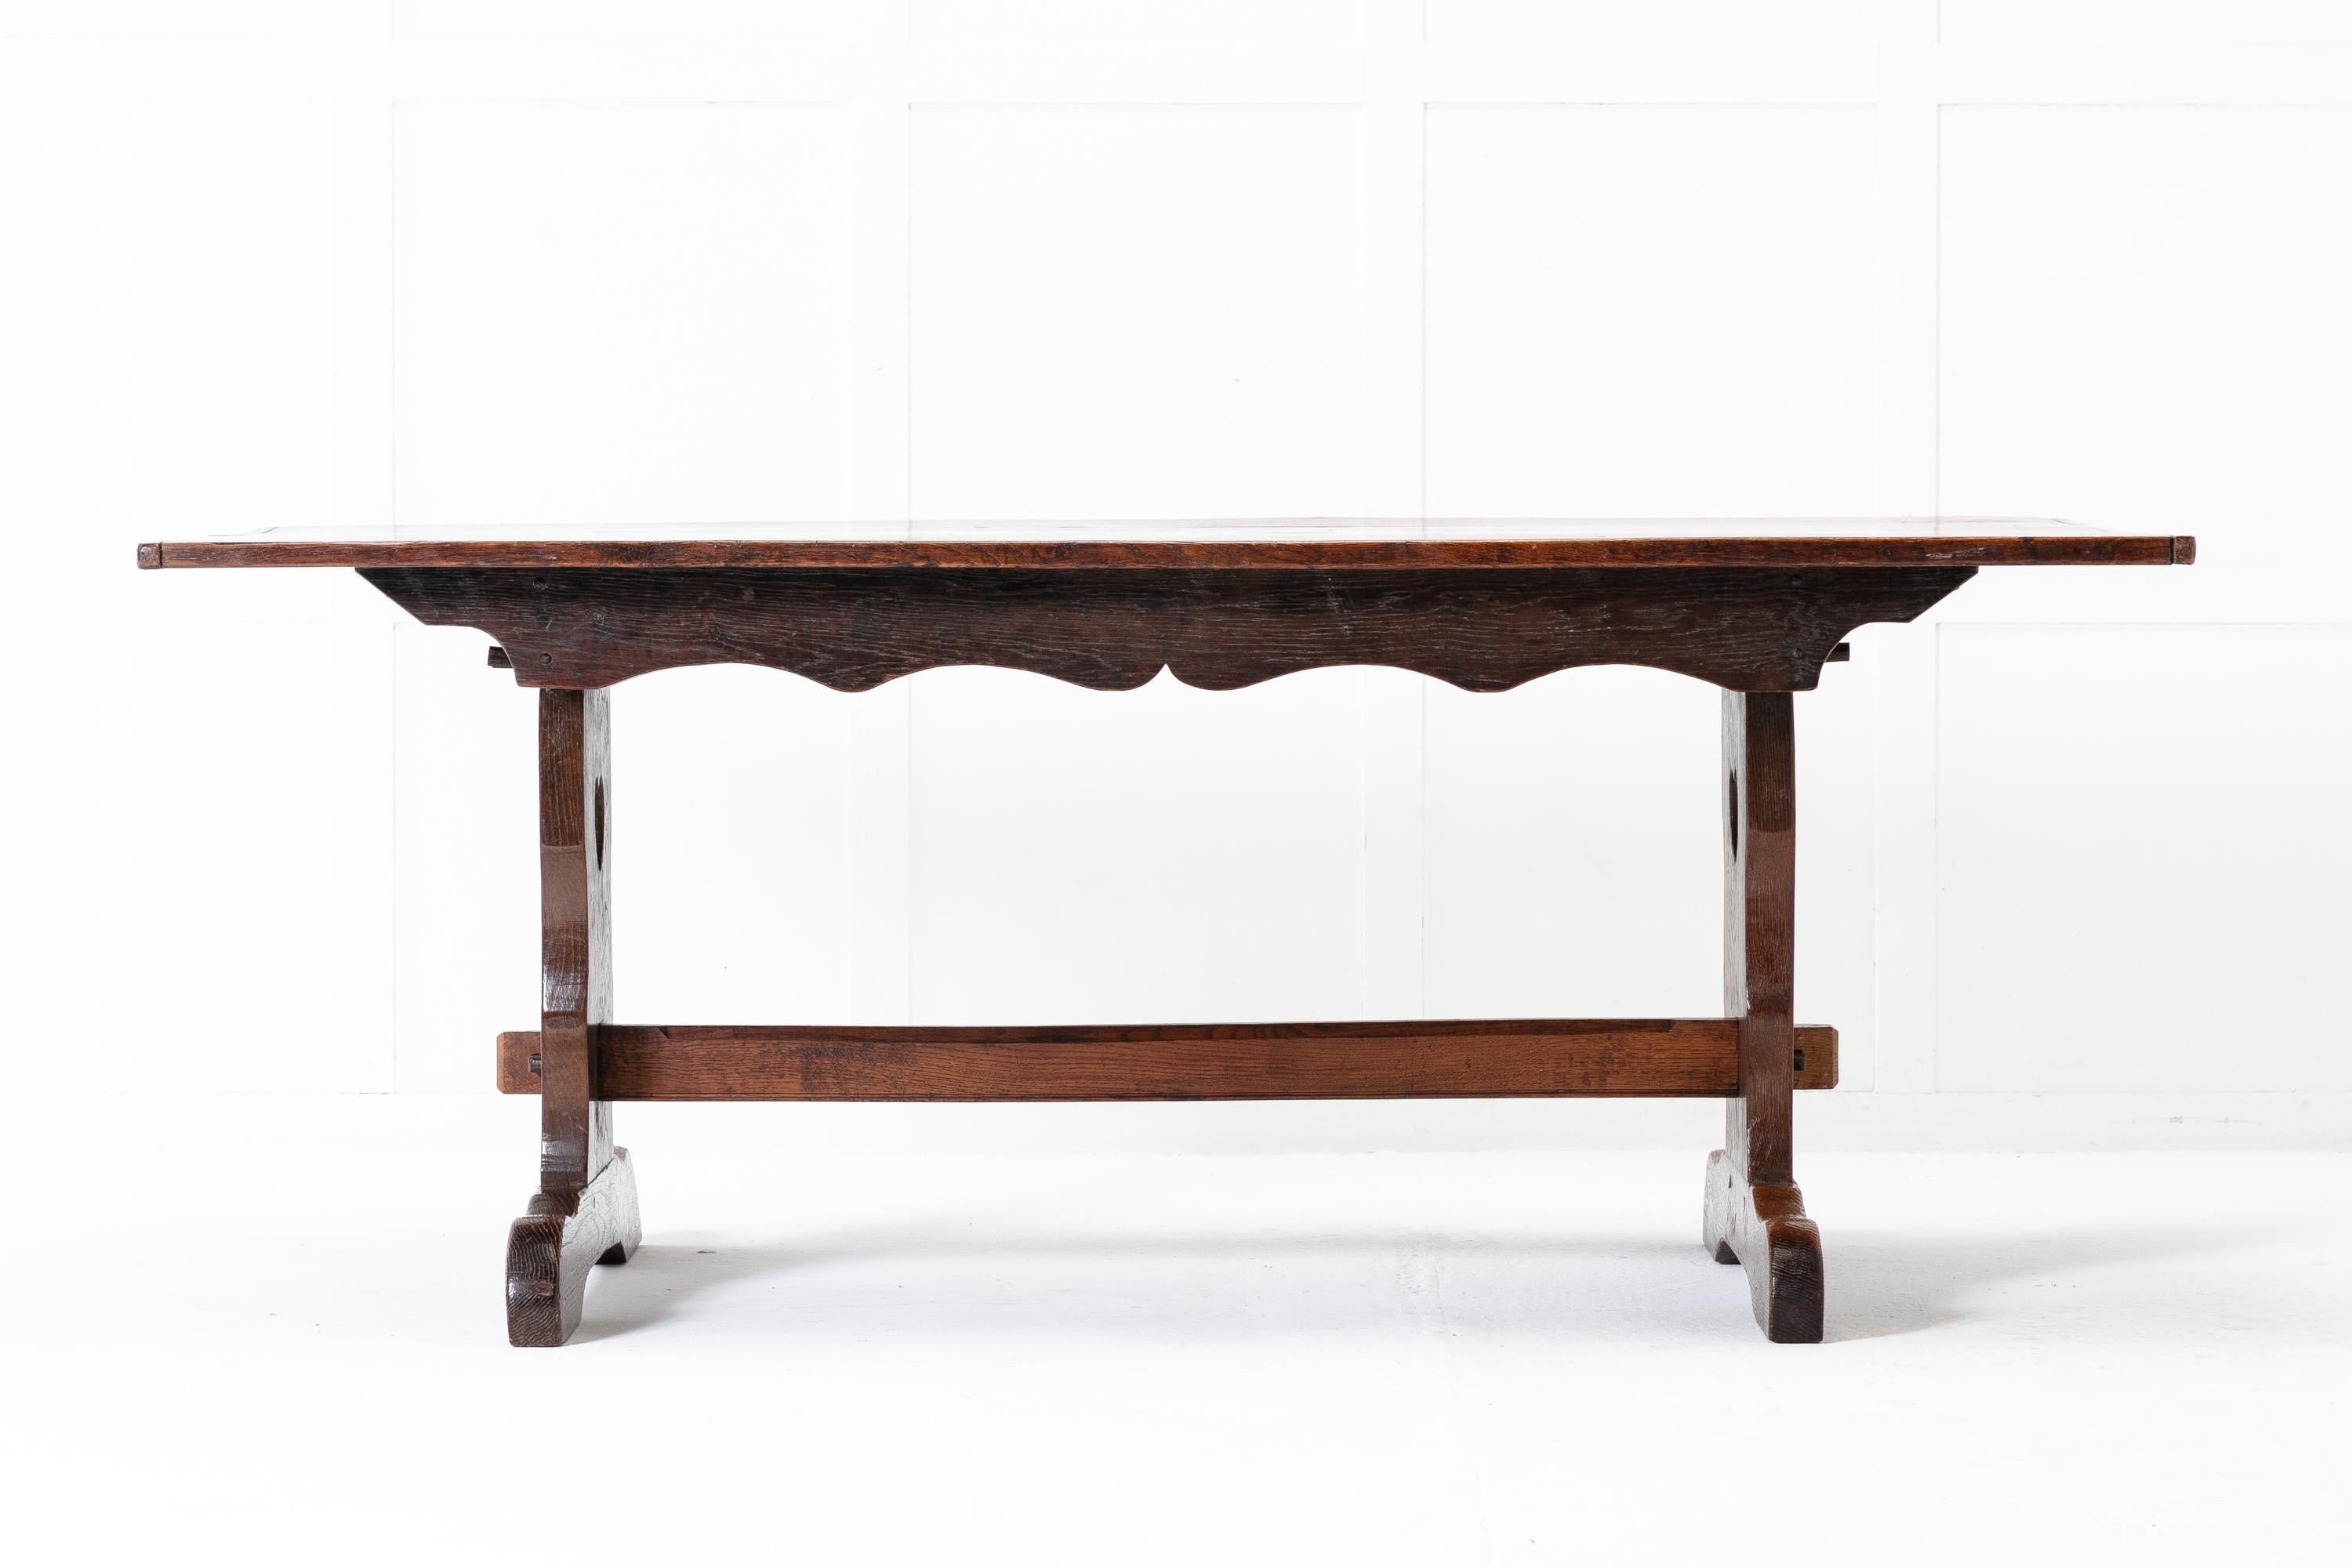 19th Century refectory table with its pegged top consisting of three solid planks of oak with cleated ends. Below is a wavy carved apron on both sides. The end supports have carved out shapes of hearts and keyed-through tenon joints connecting the